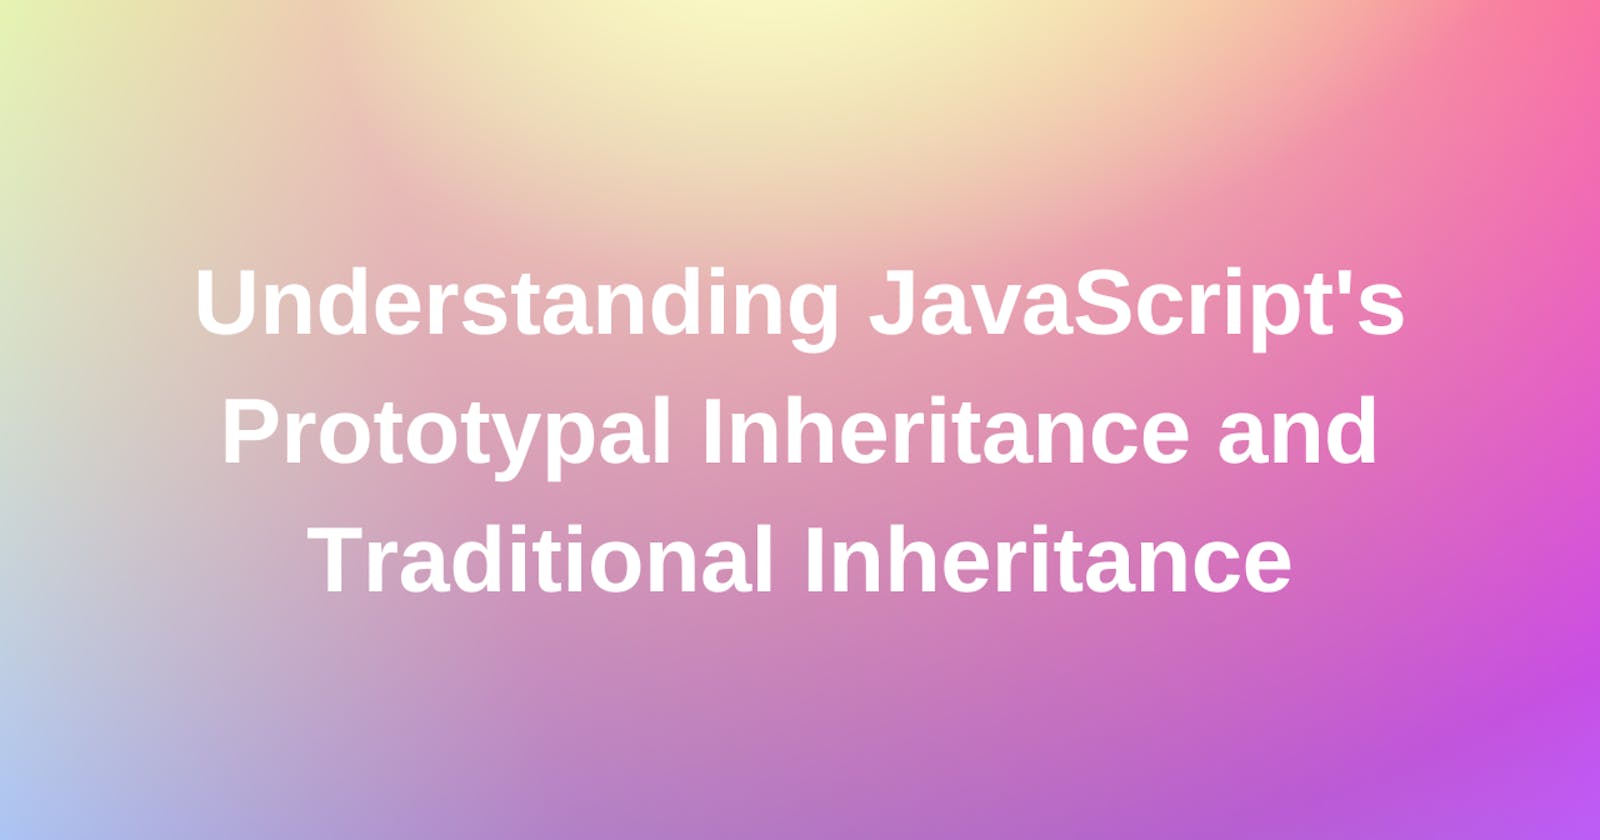 Difference between JavaScript's Prototypal Inheritance and Traditional Inheritance